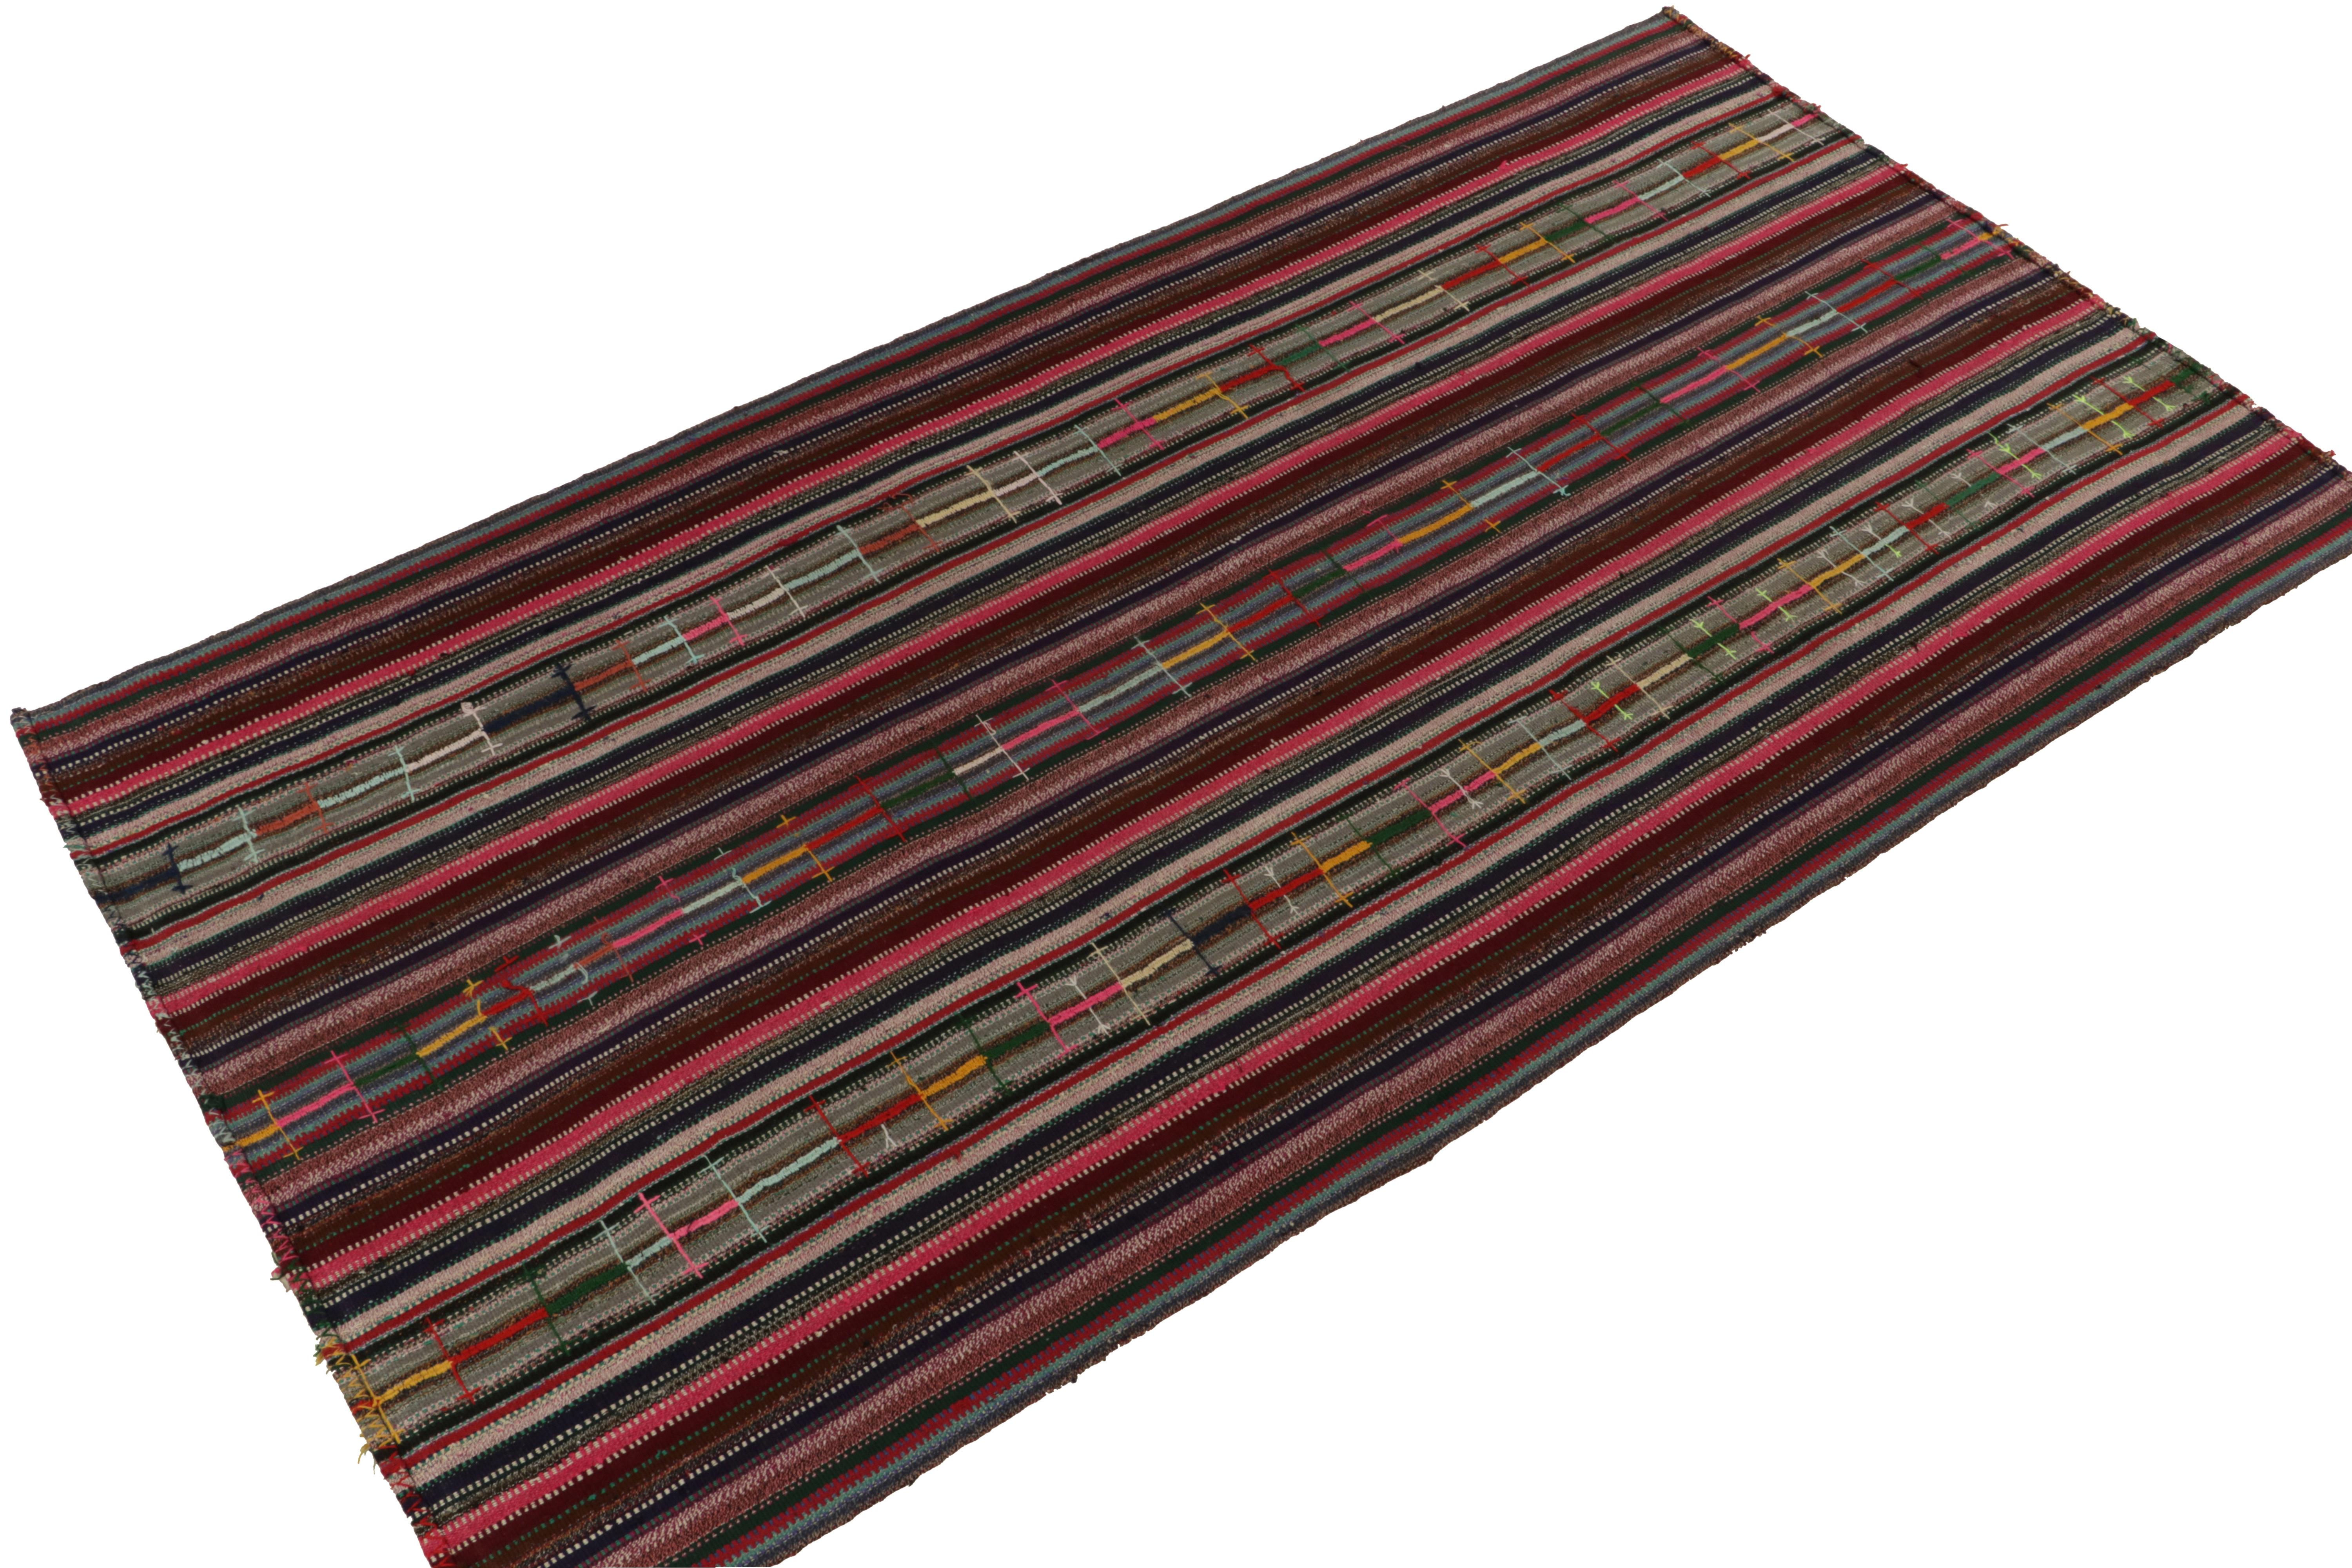 Mid-Century Modern 1950s Vintage Chaput Kilim Rug in Multicolor Striped Patterns, by Rug & Kilim For Sale